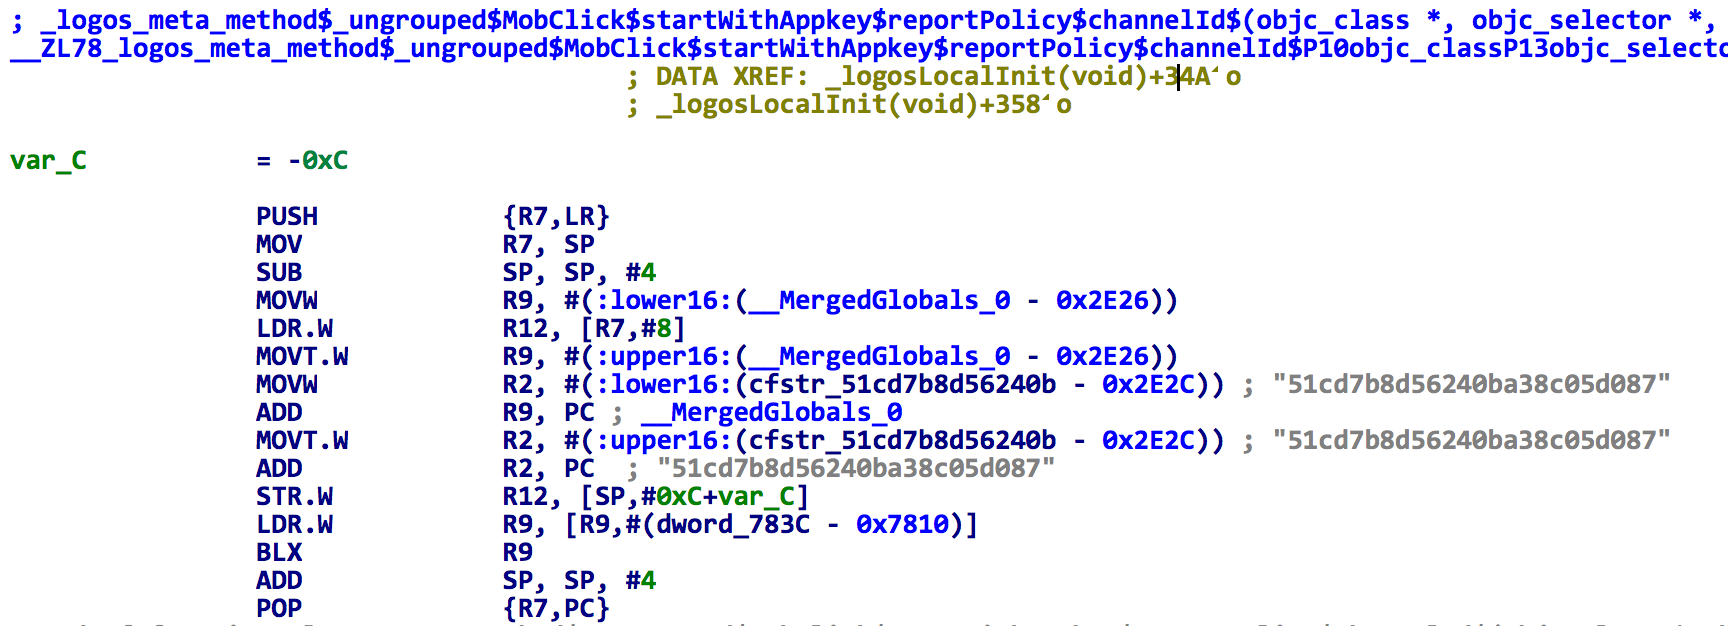 Figure 2. The spad.dylib changes app key in MobClick SDK